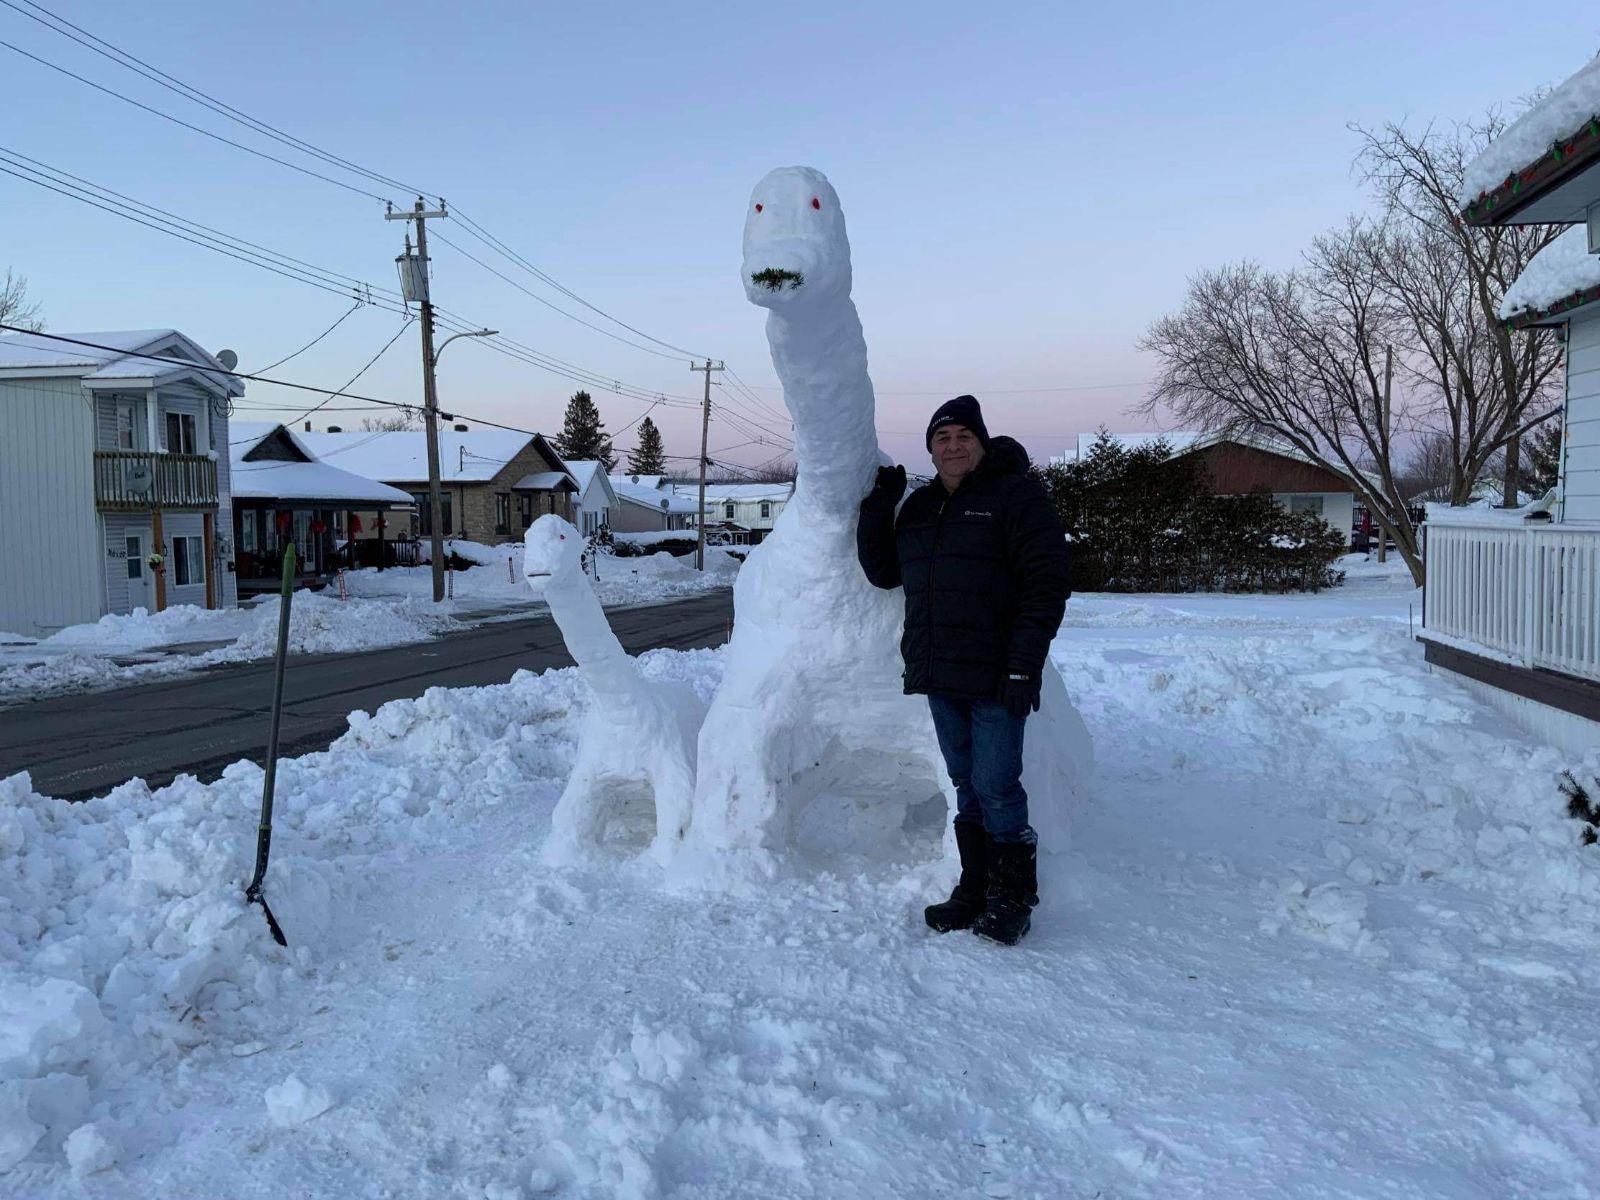 Hawkesbury man brings colour and happiness to winter with snow sculptures